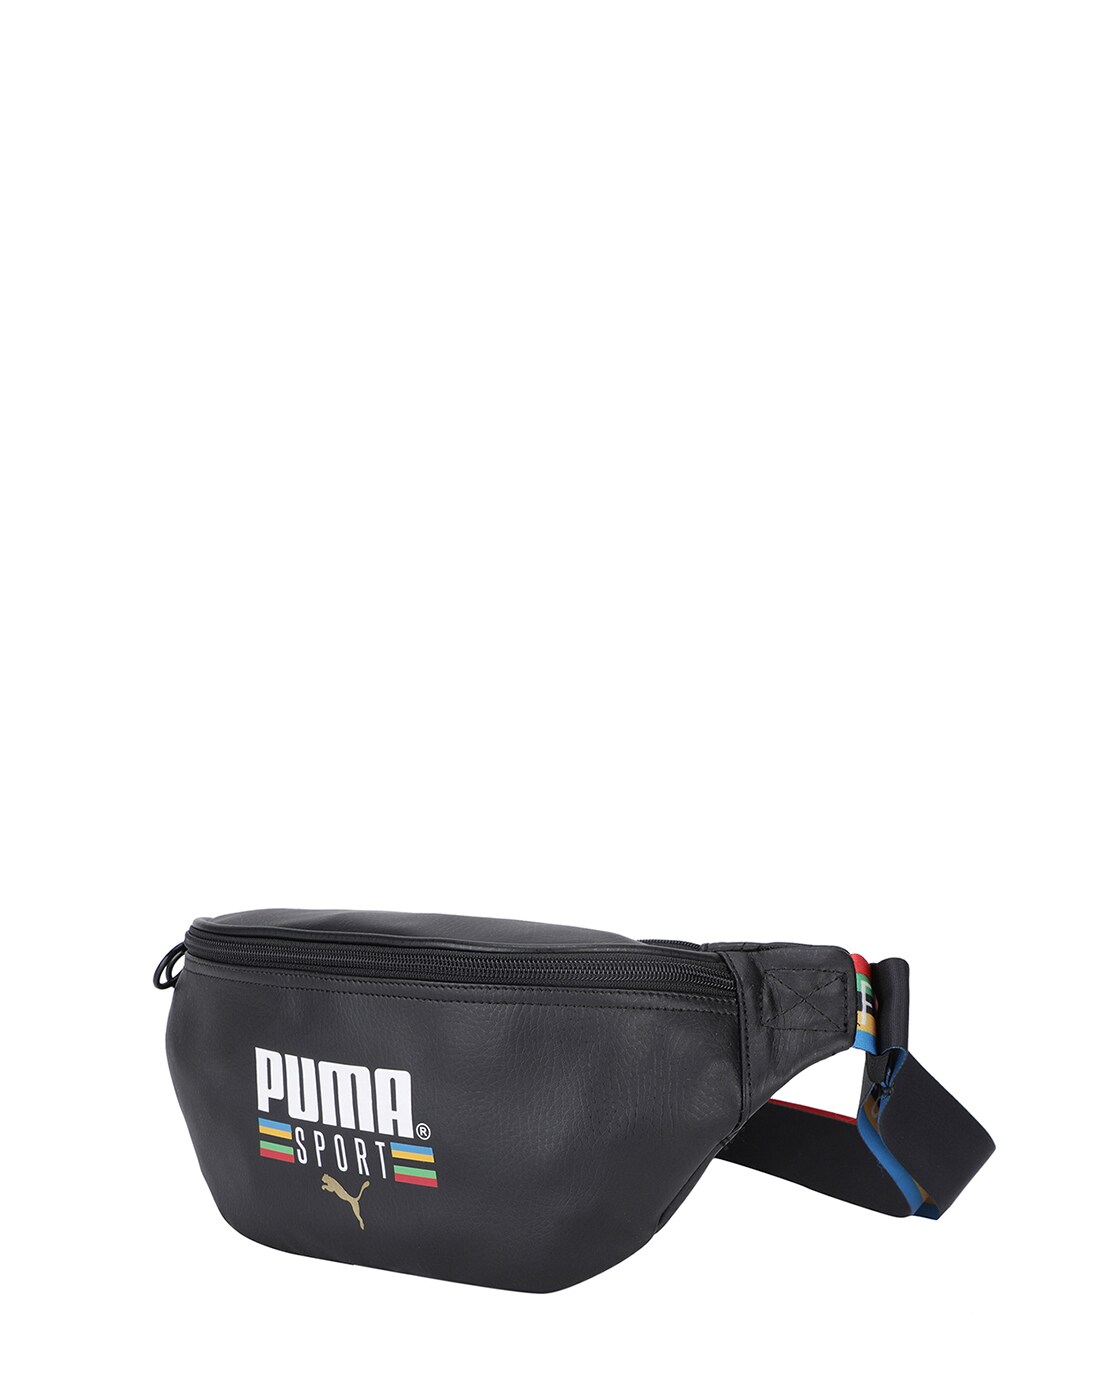 Super Funny™ Fanny Pack – SuperFunny